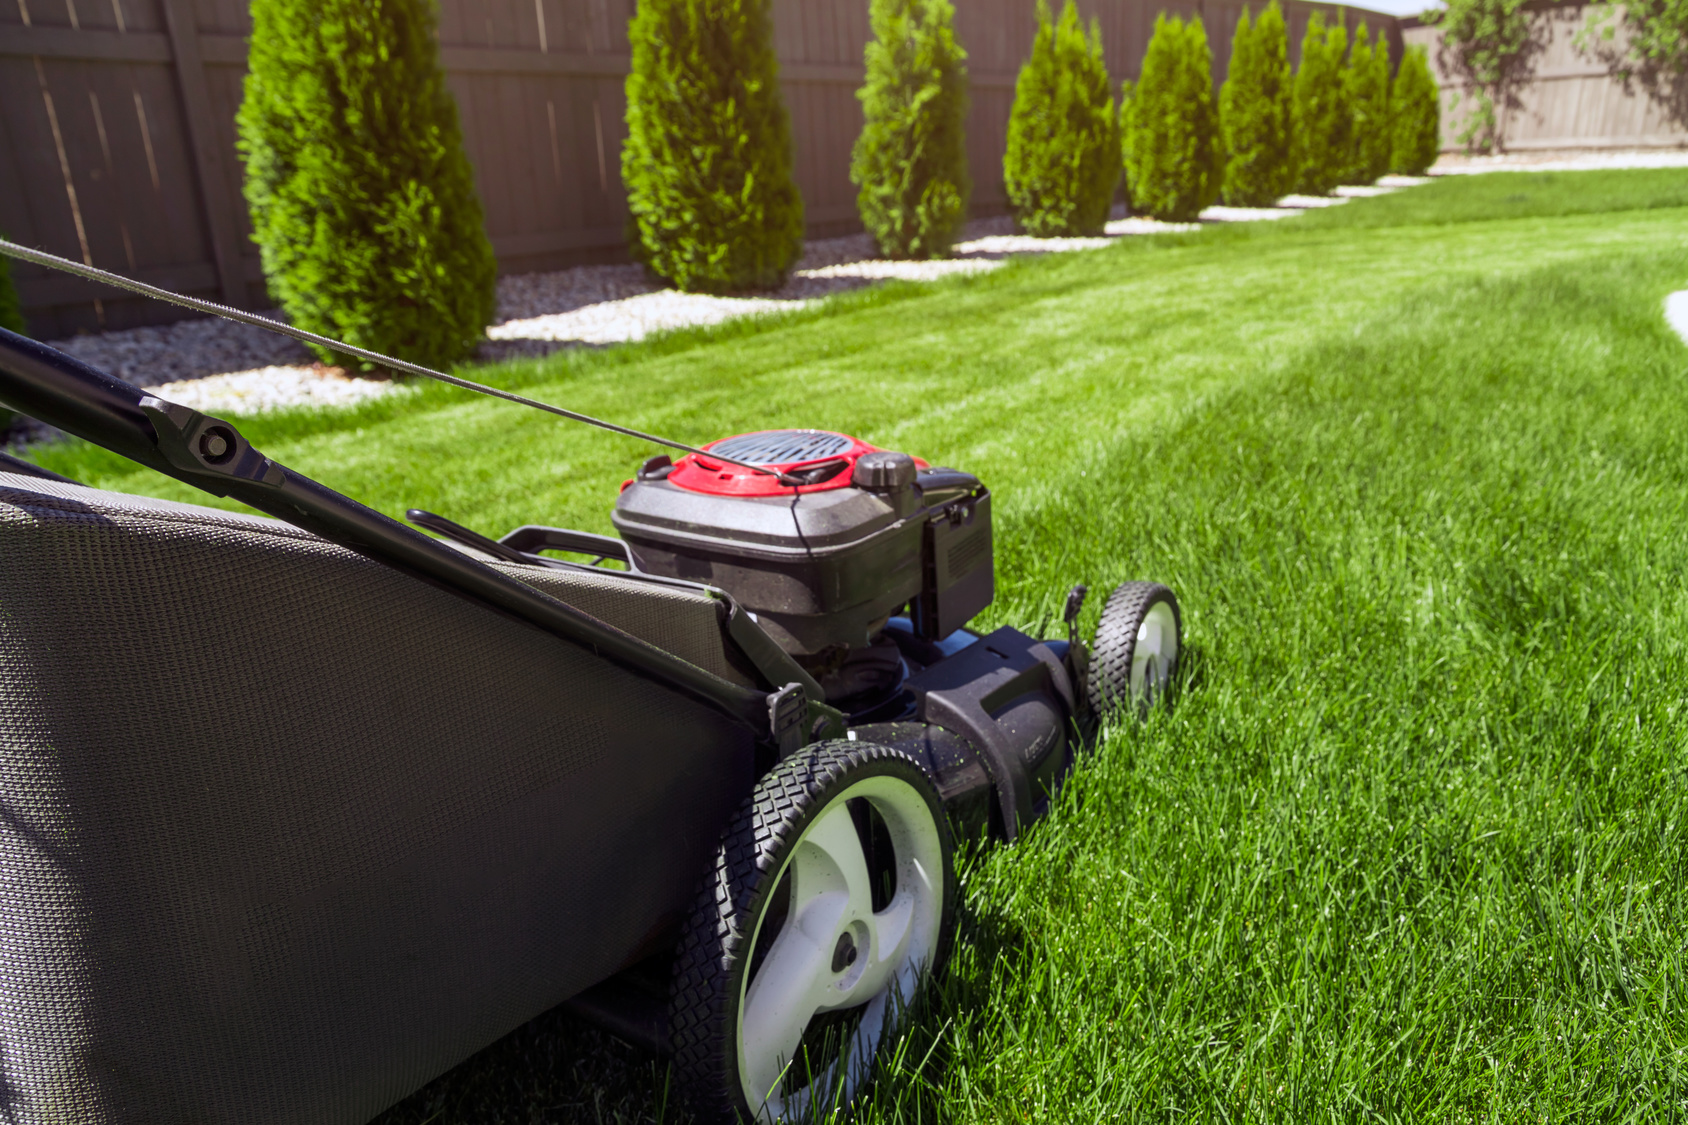 6 Steps to Having the Best Lawn in the Neighborhood